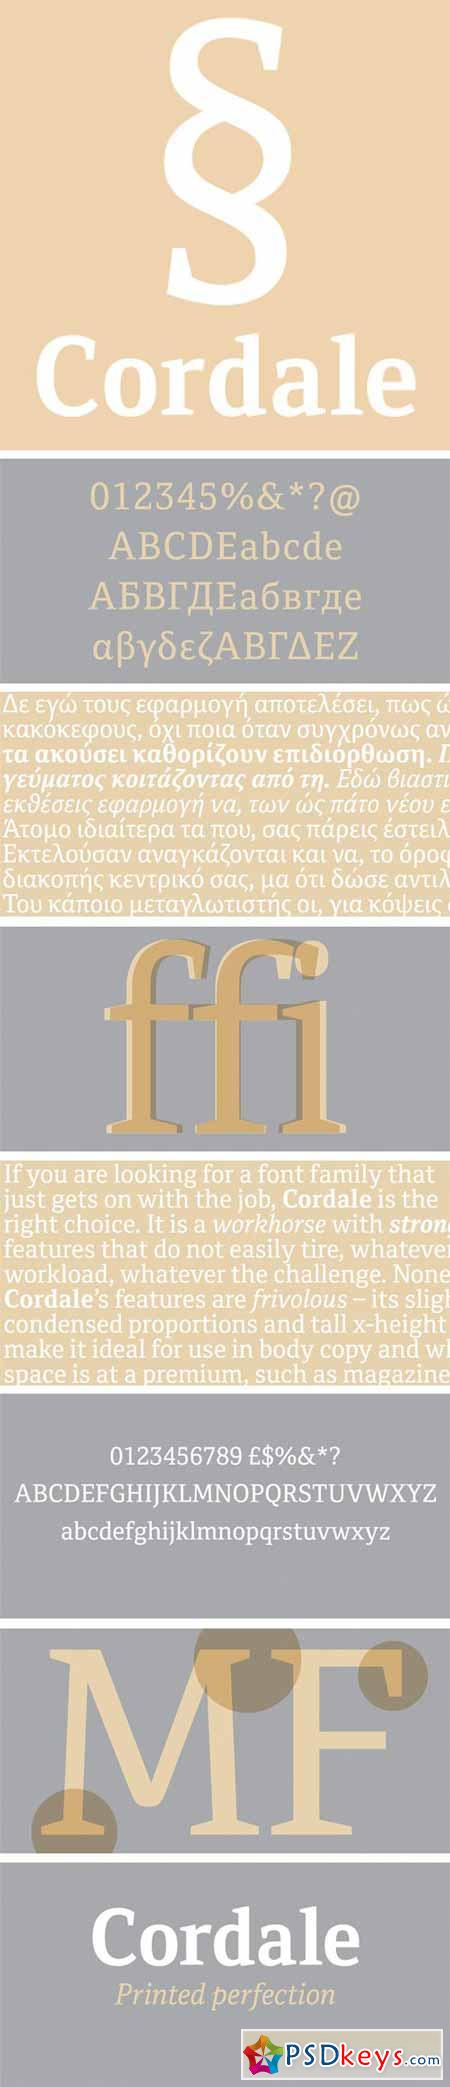 Cordale Font Family - 4 Fonts for $270